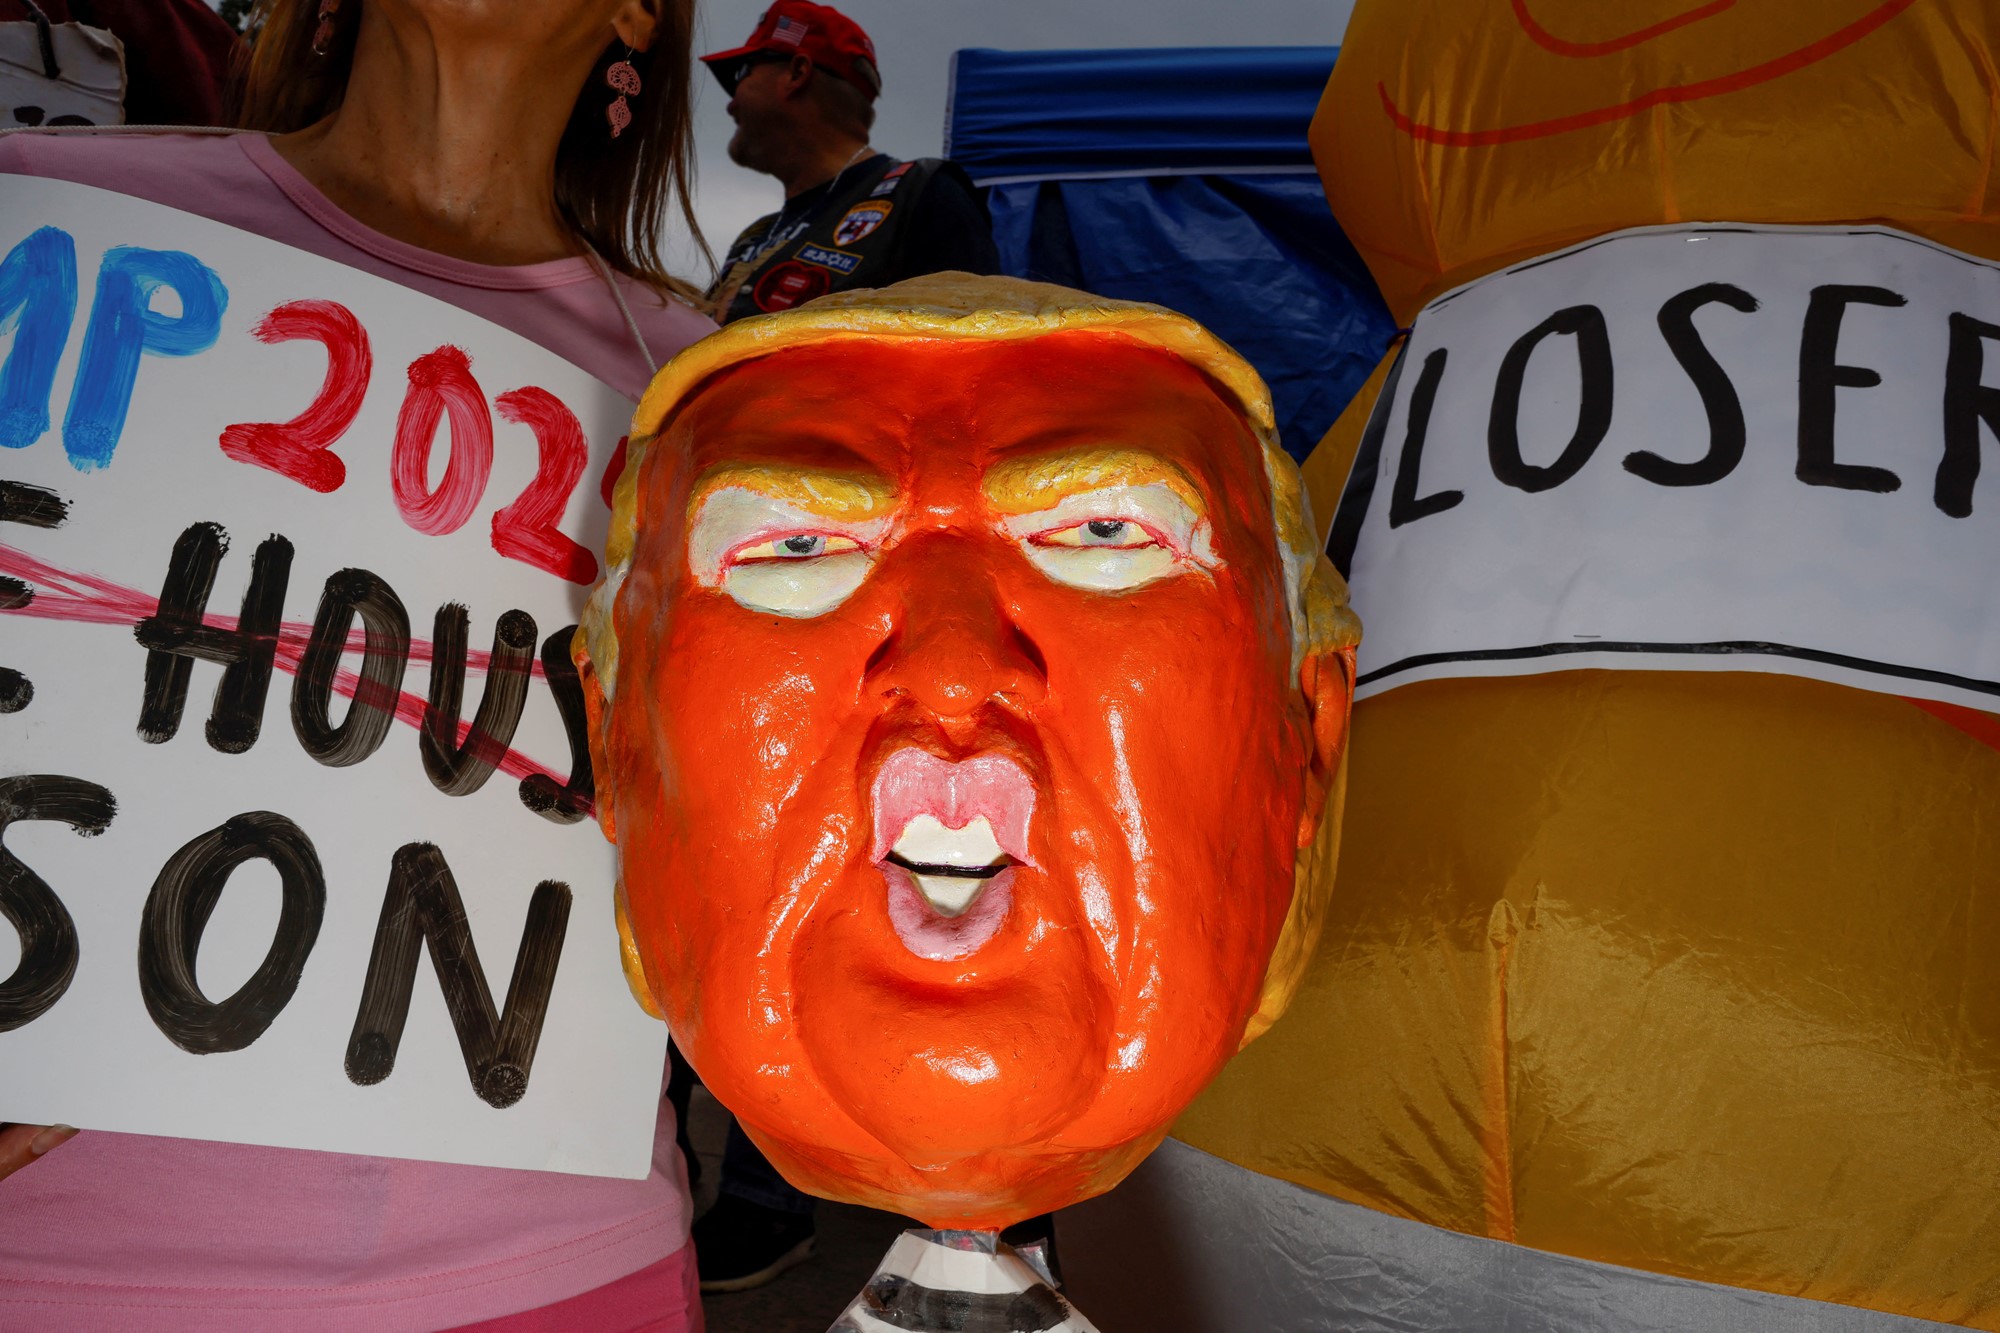 A demonstrator displays a Trump figurine on the day former U.S. President Donald Trump, who is facing federal charges related to attempts to overturn his 2020 election defeat, appears at the U.S. District Court in Washington, U.S., August 3, 2023